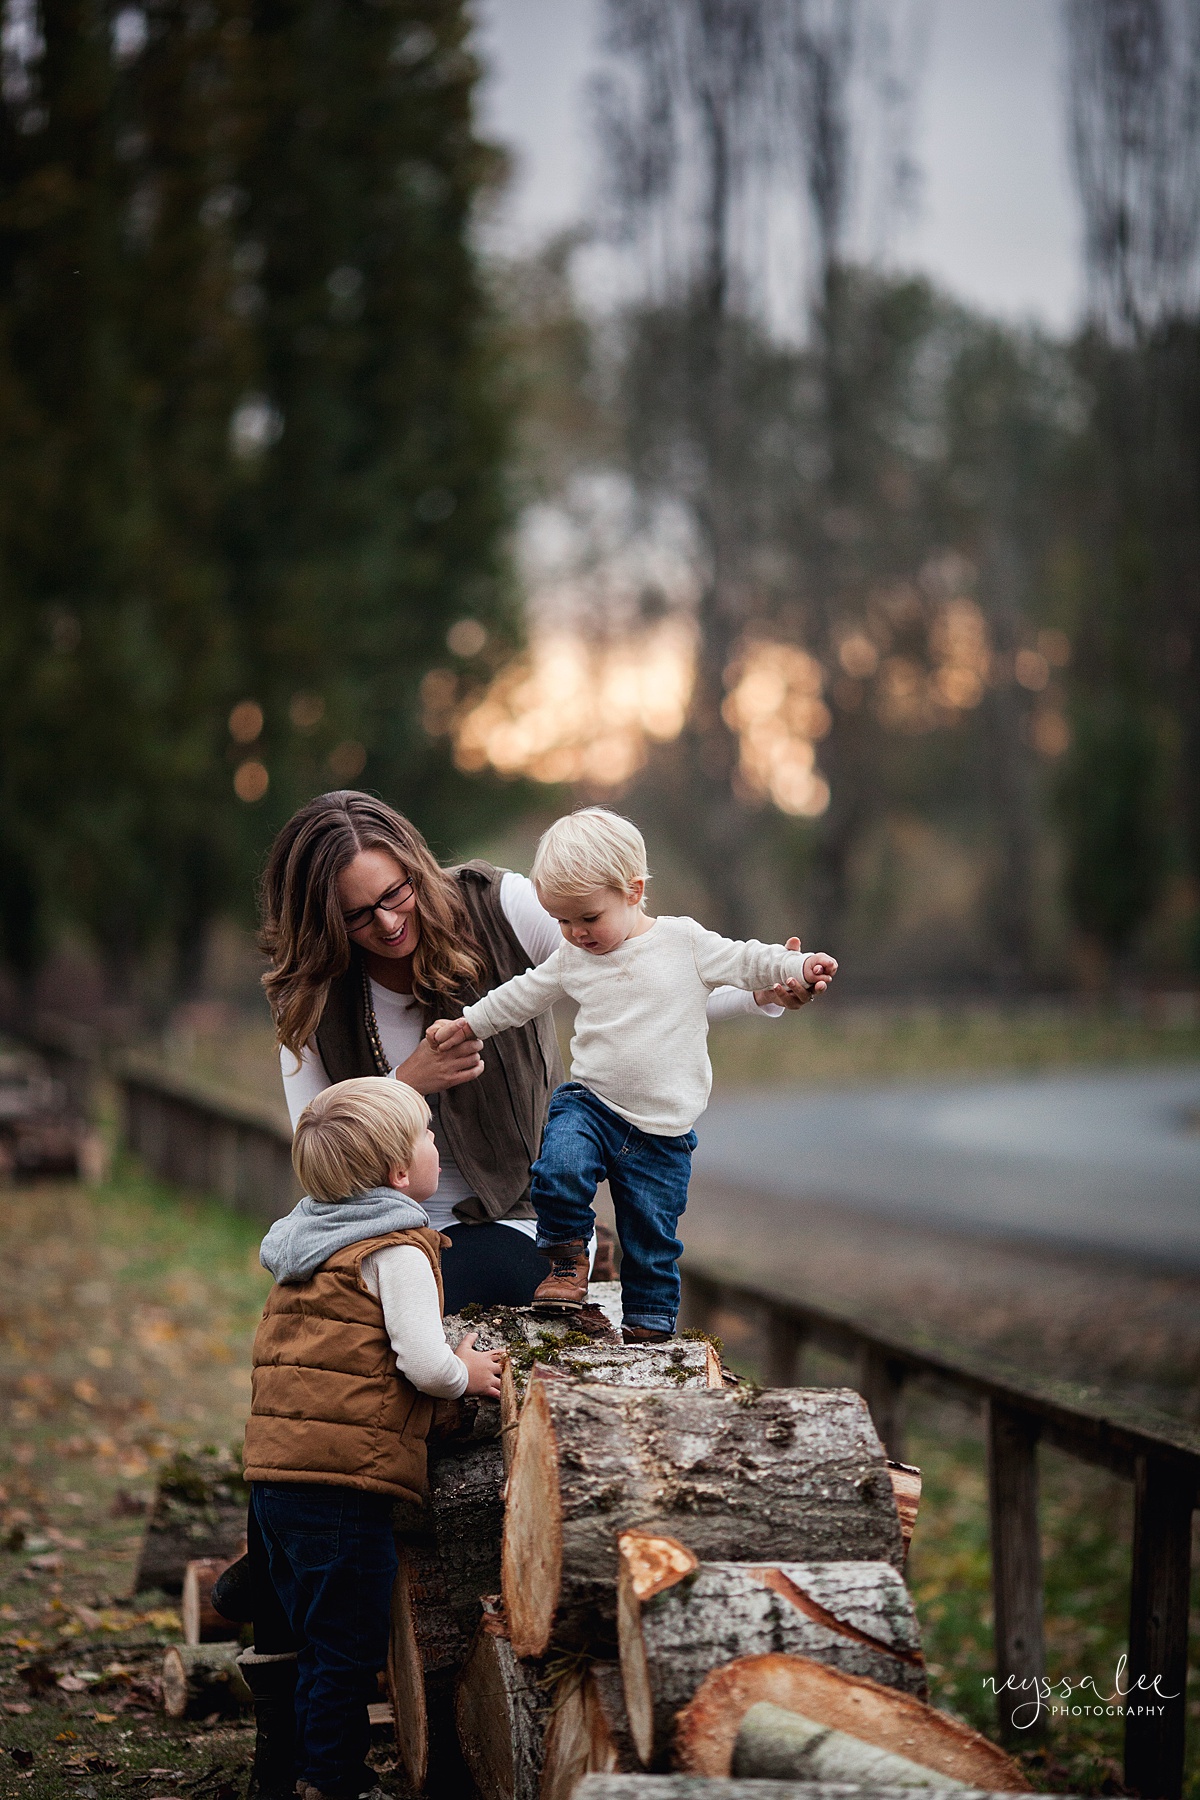 Neyssa Lee Photography, Snoqualmie Family Photographer, Fall Family Photos, Lifestyle Mother and Sons photo